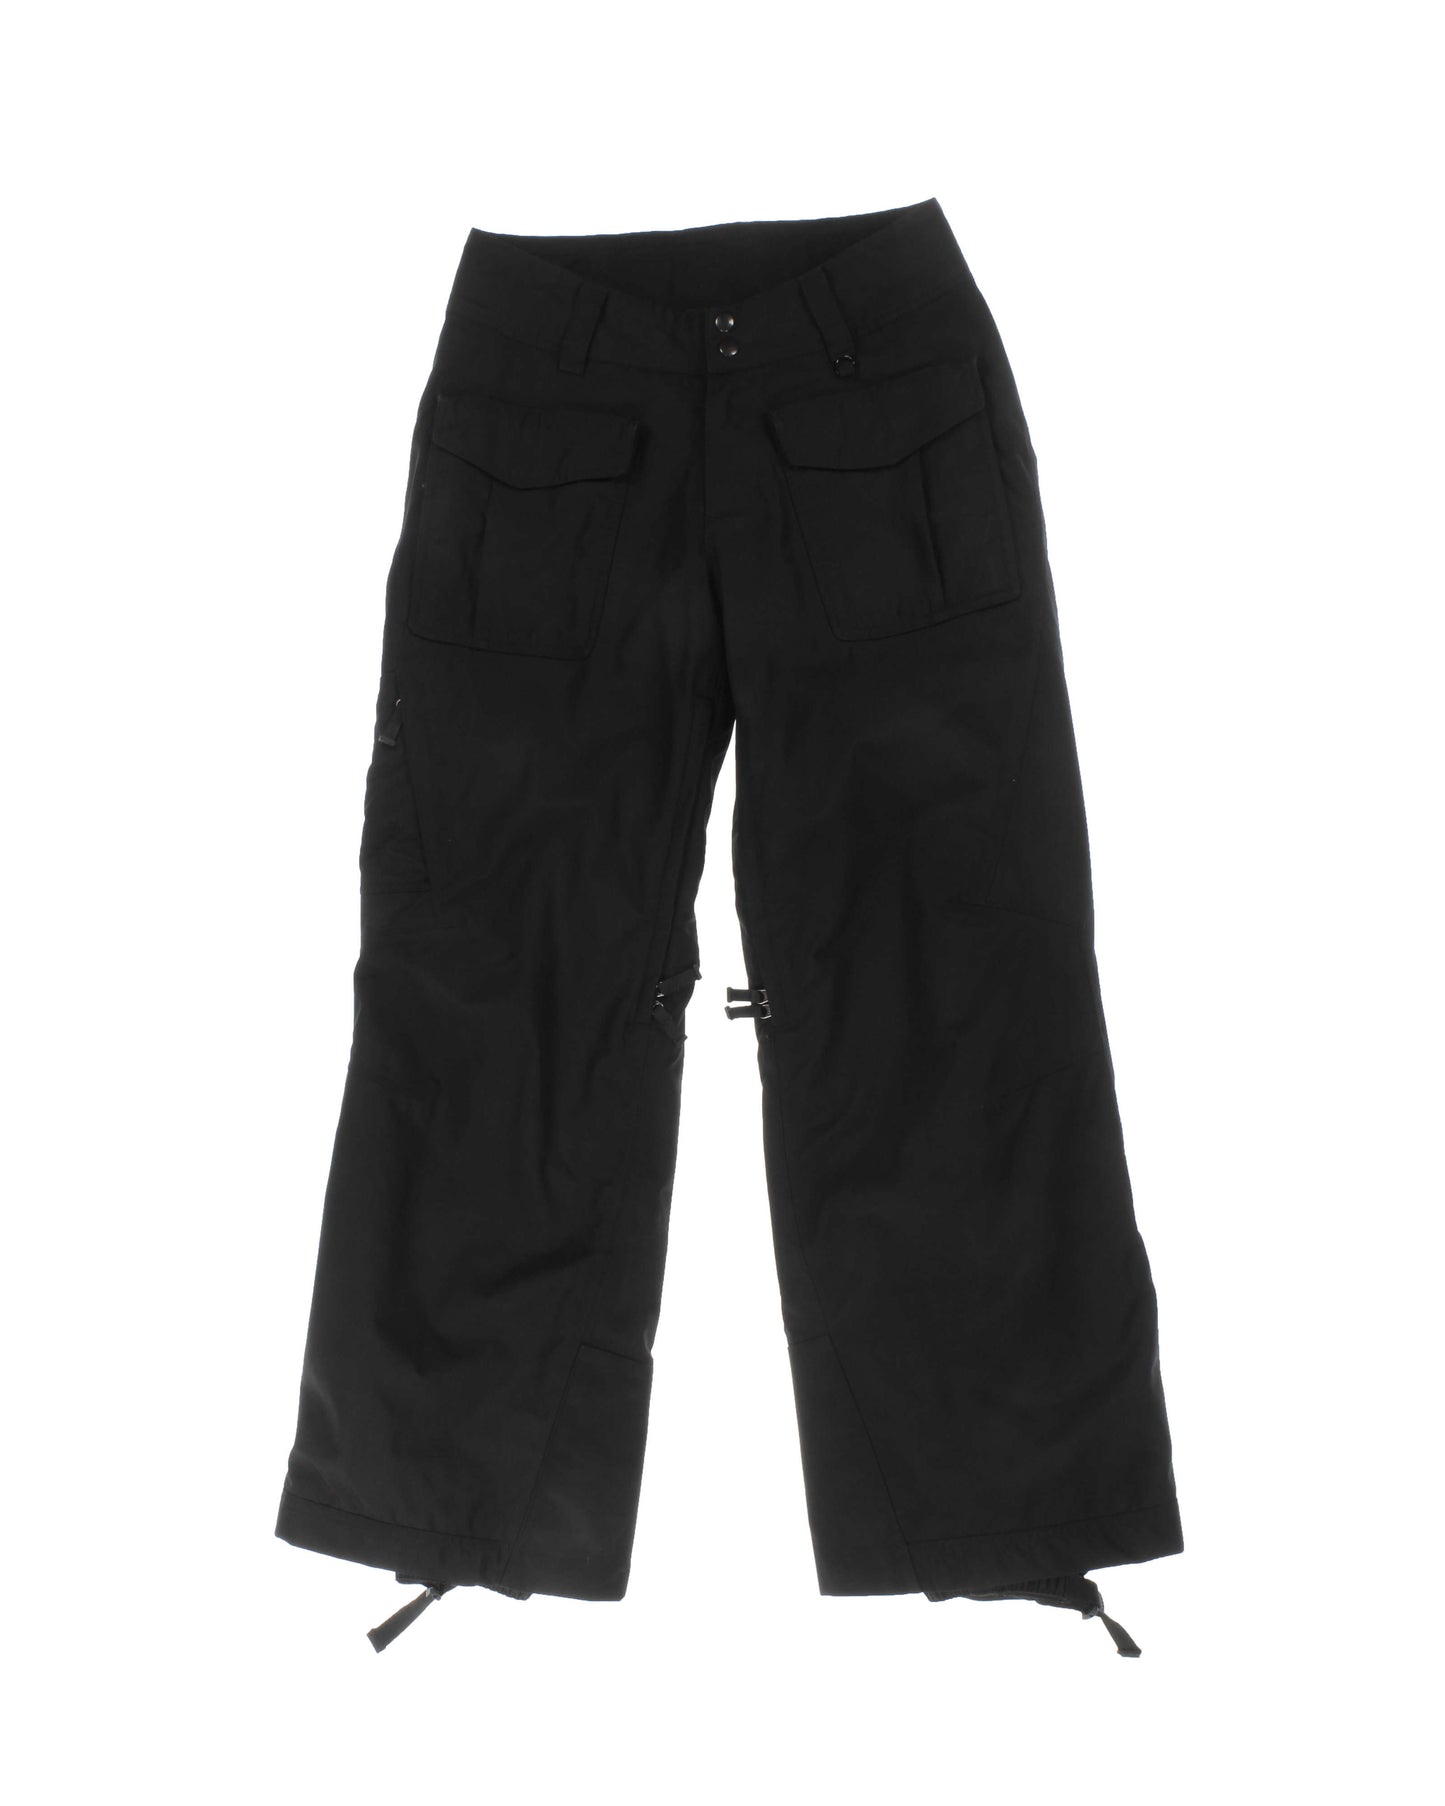 W's Insulated Sidewall Pants